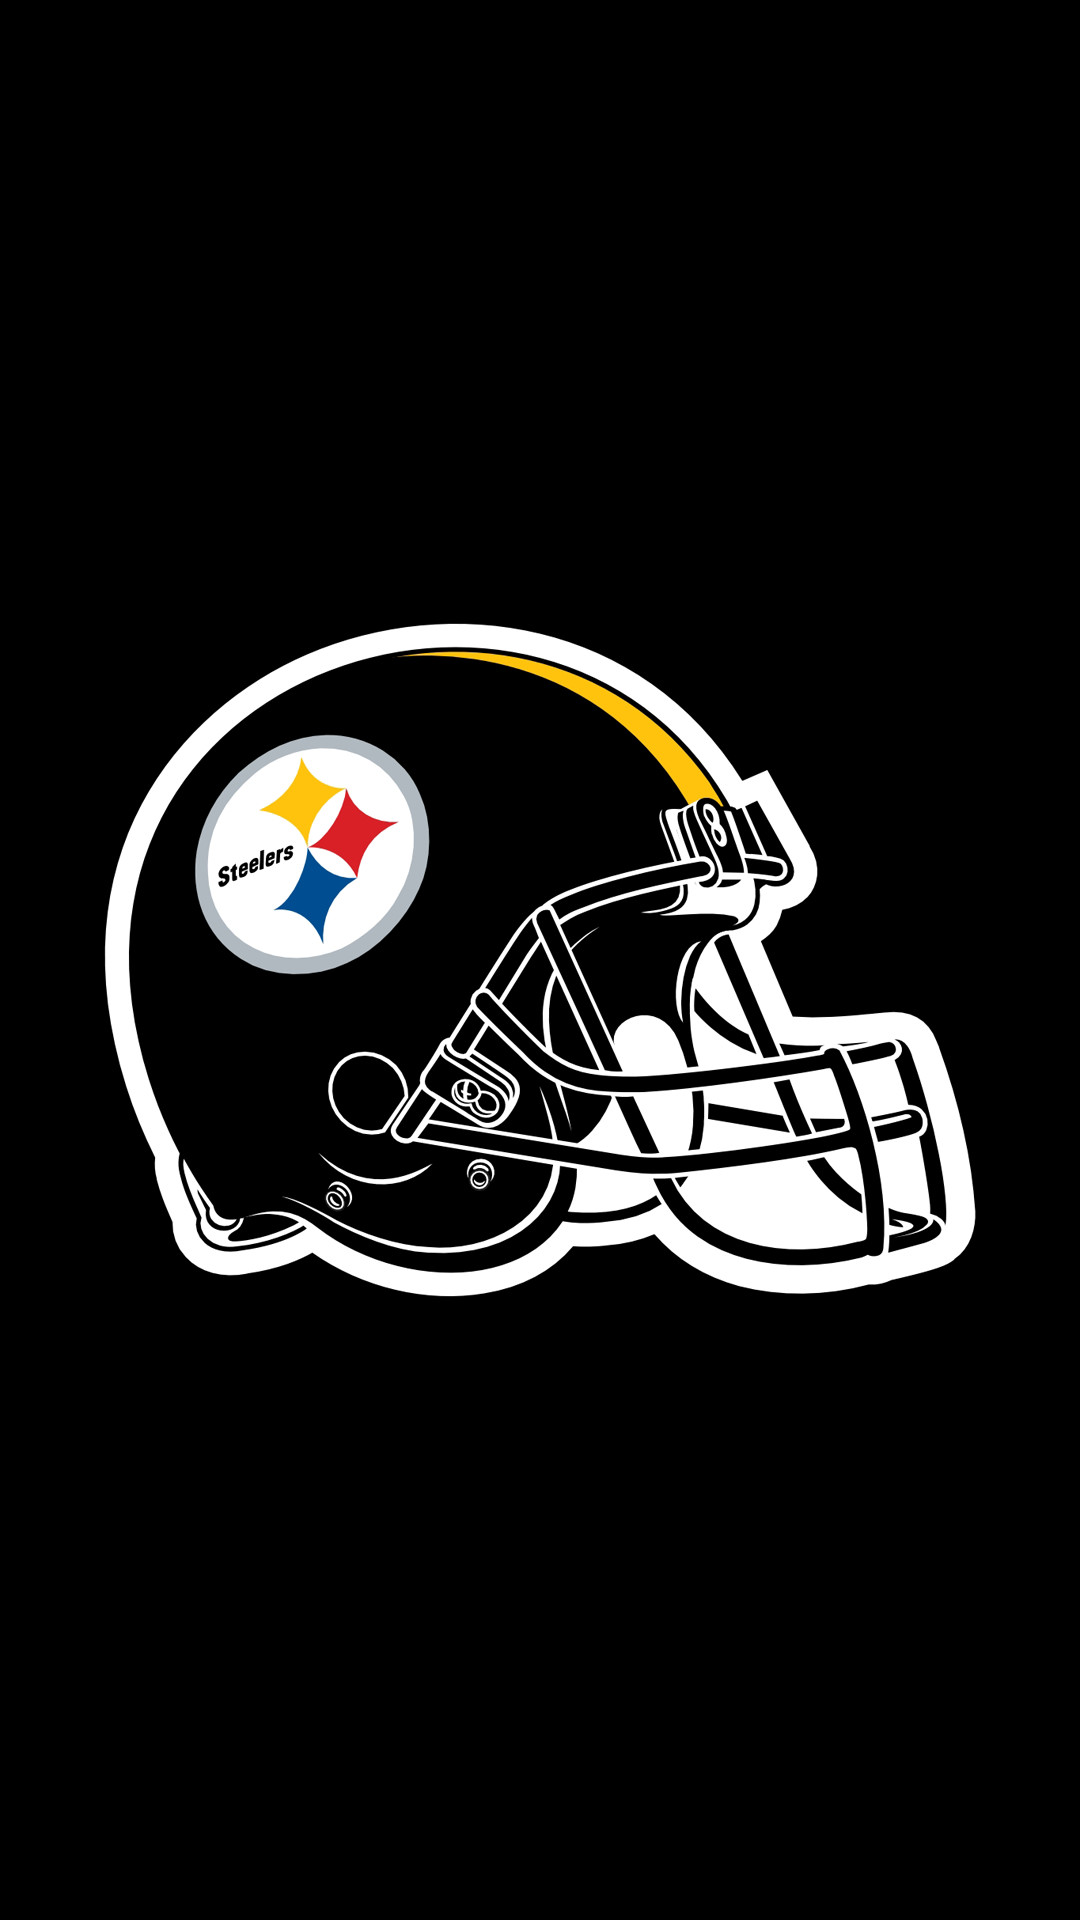 1080x1920 Steelers Wallpaper For Iphone